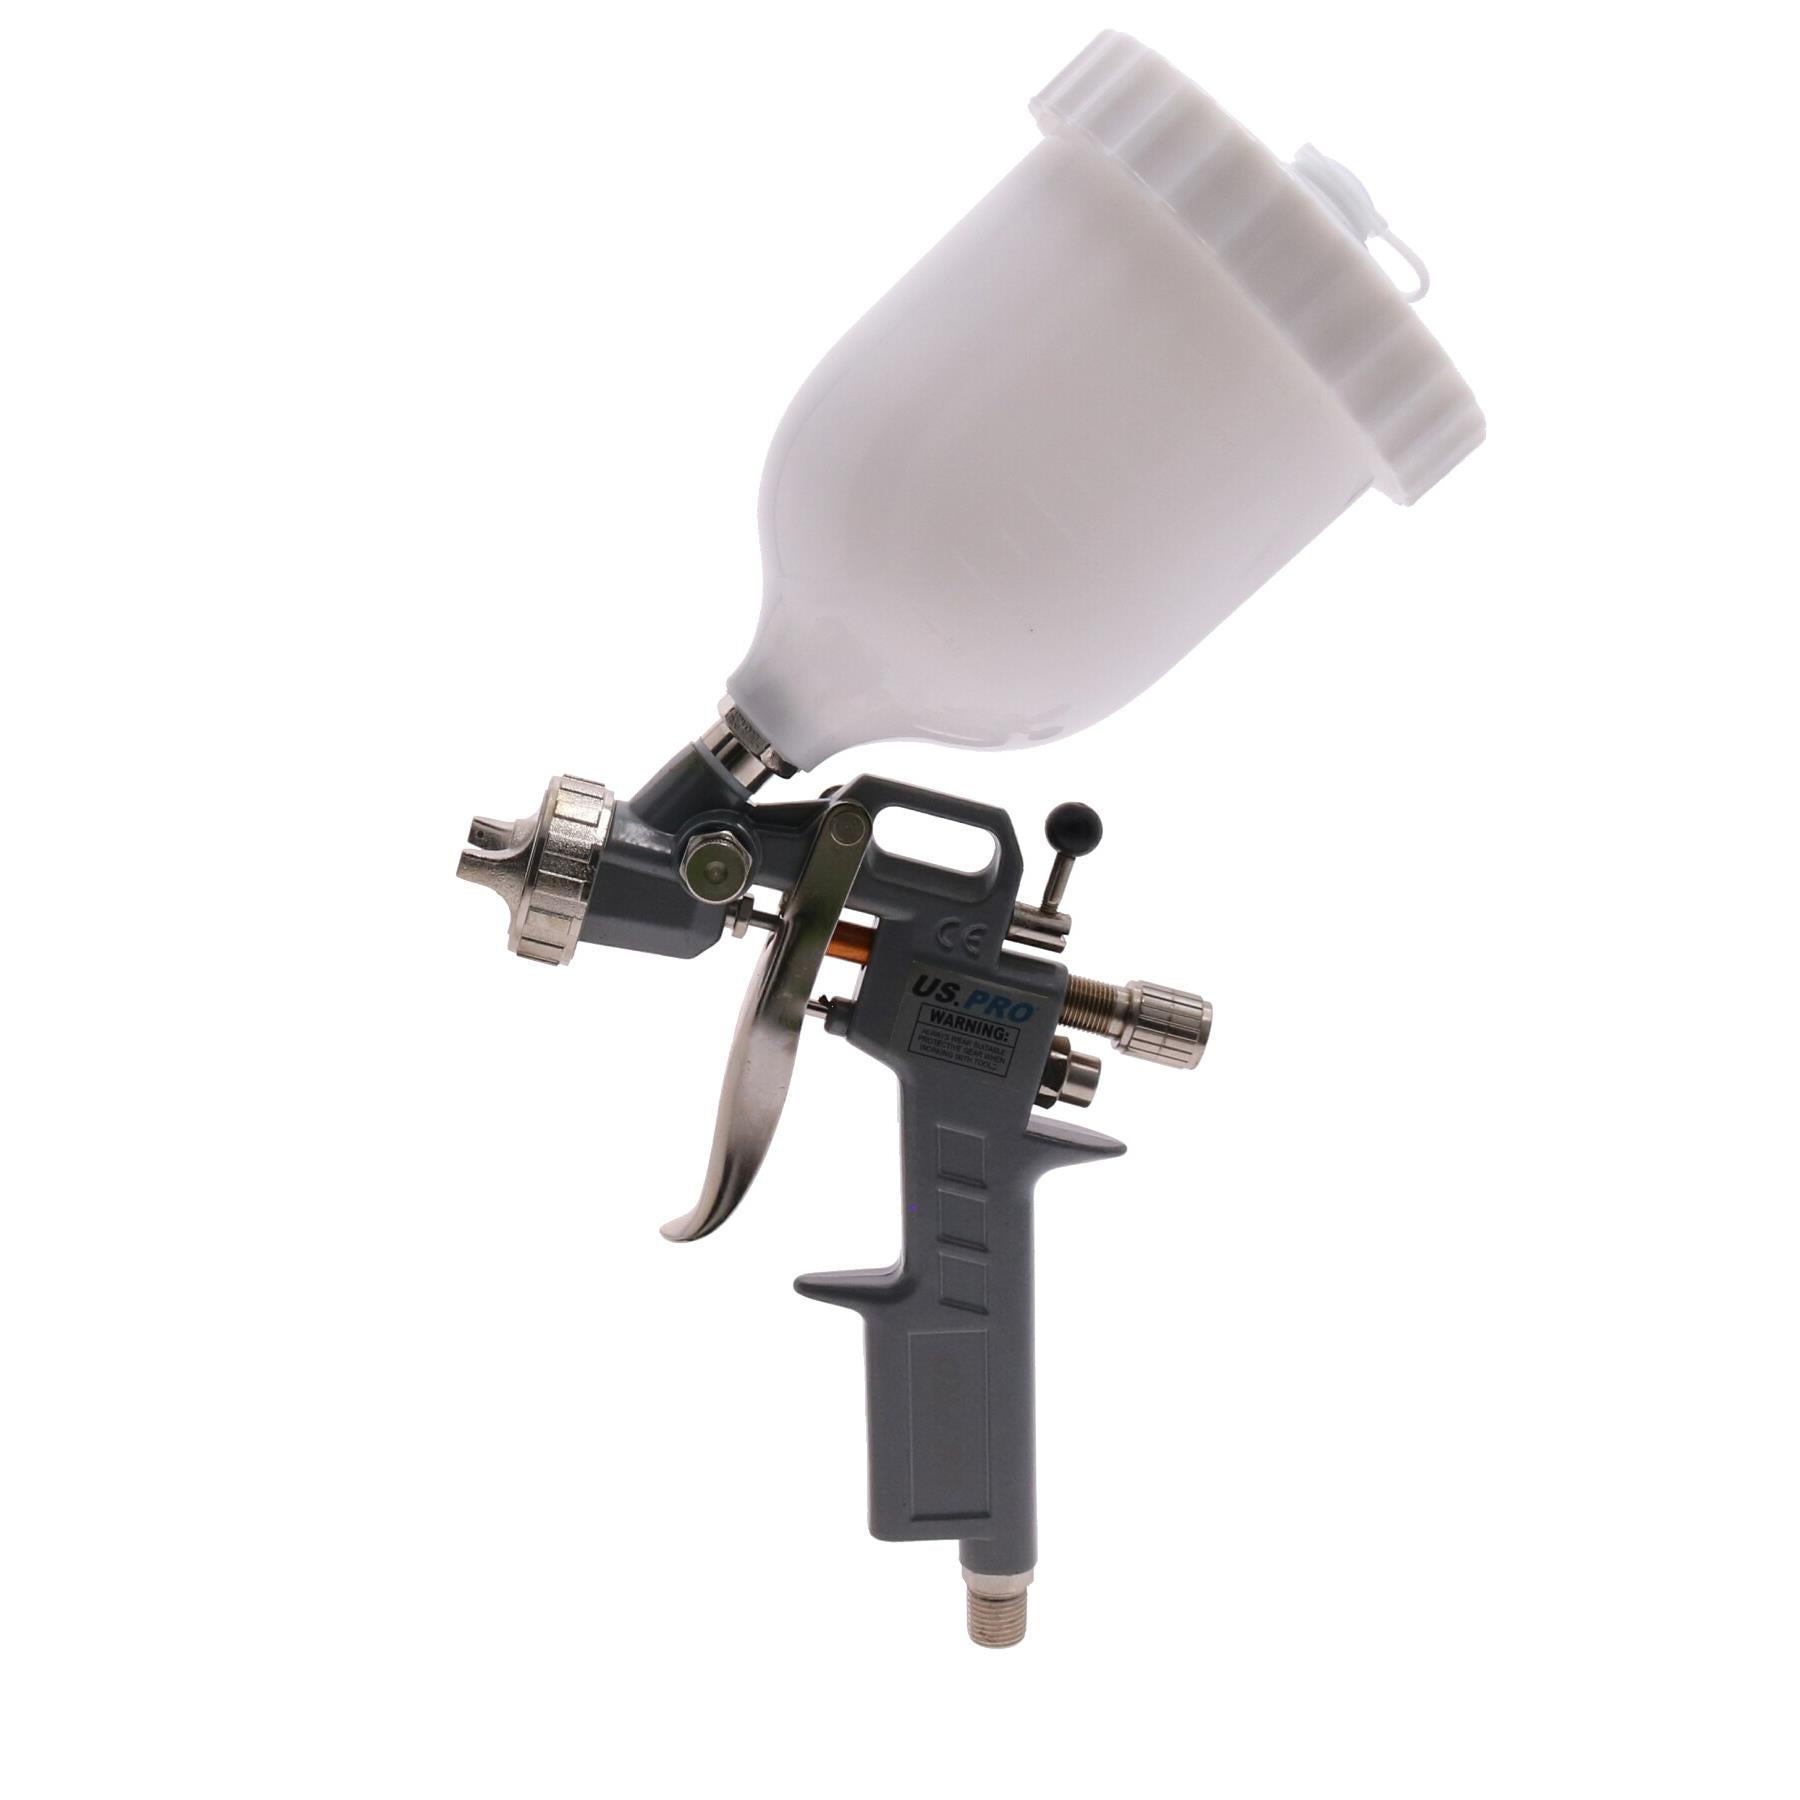 HVLP Gravity feed spray gun 600ml (cup size) 1.5 nozzle AT012